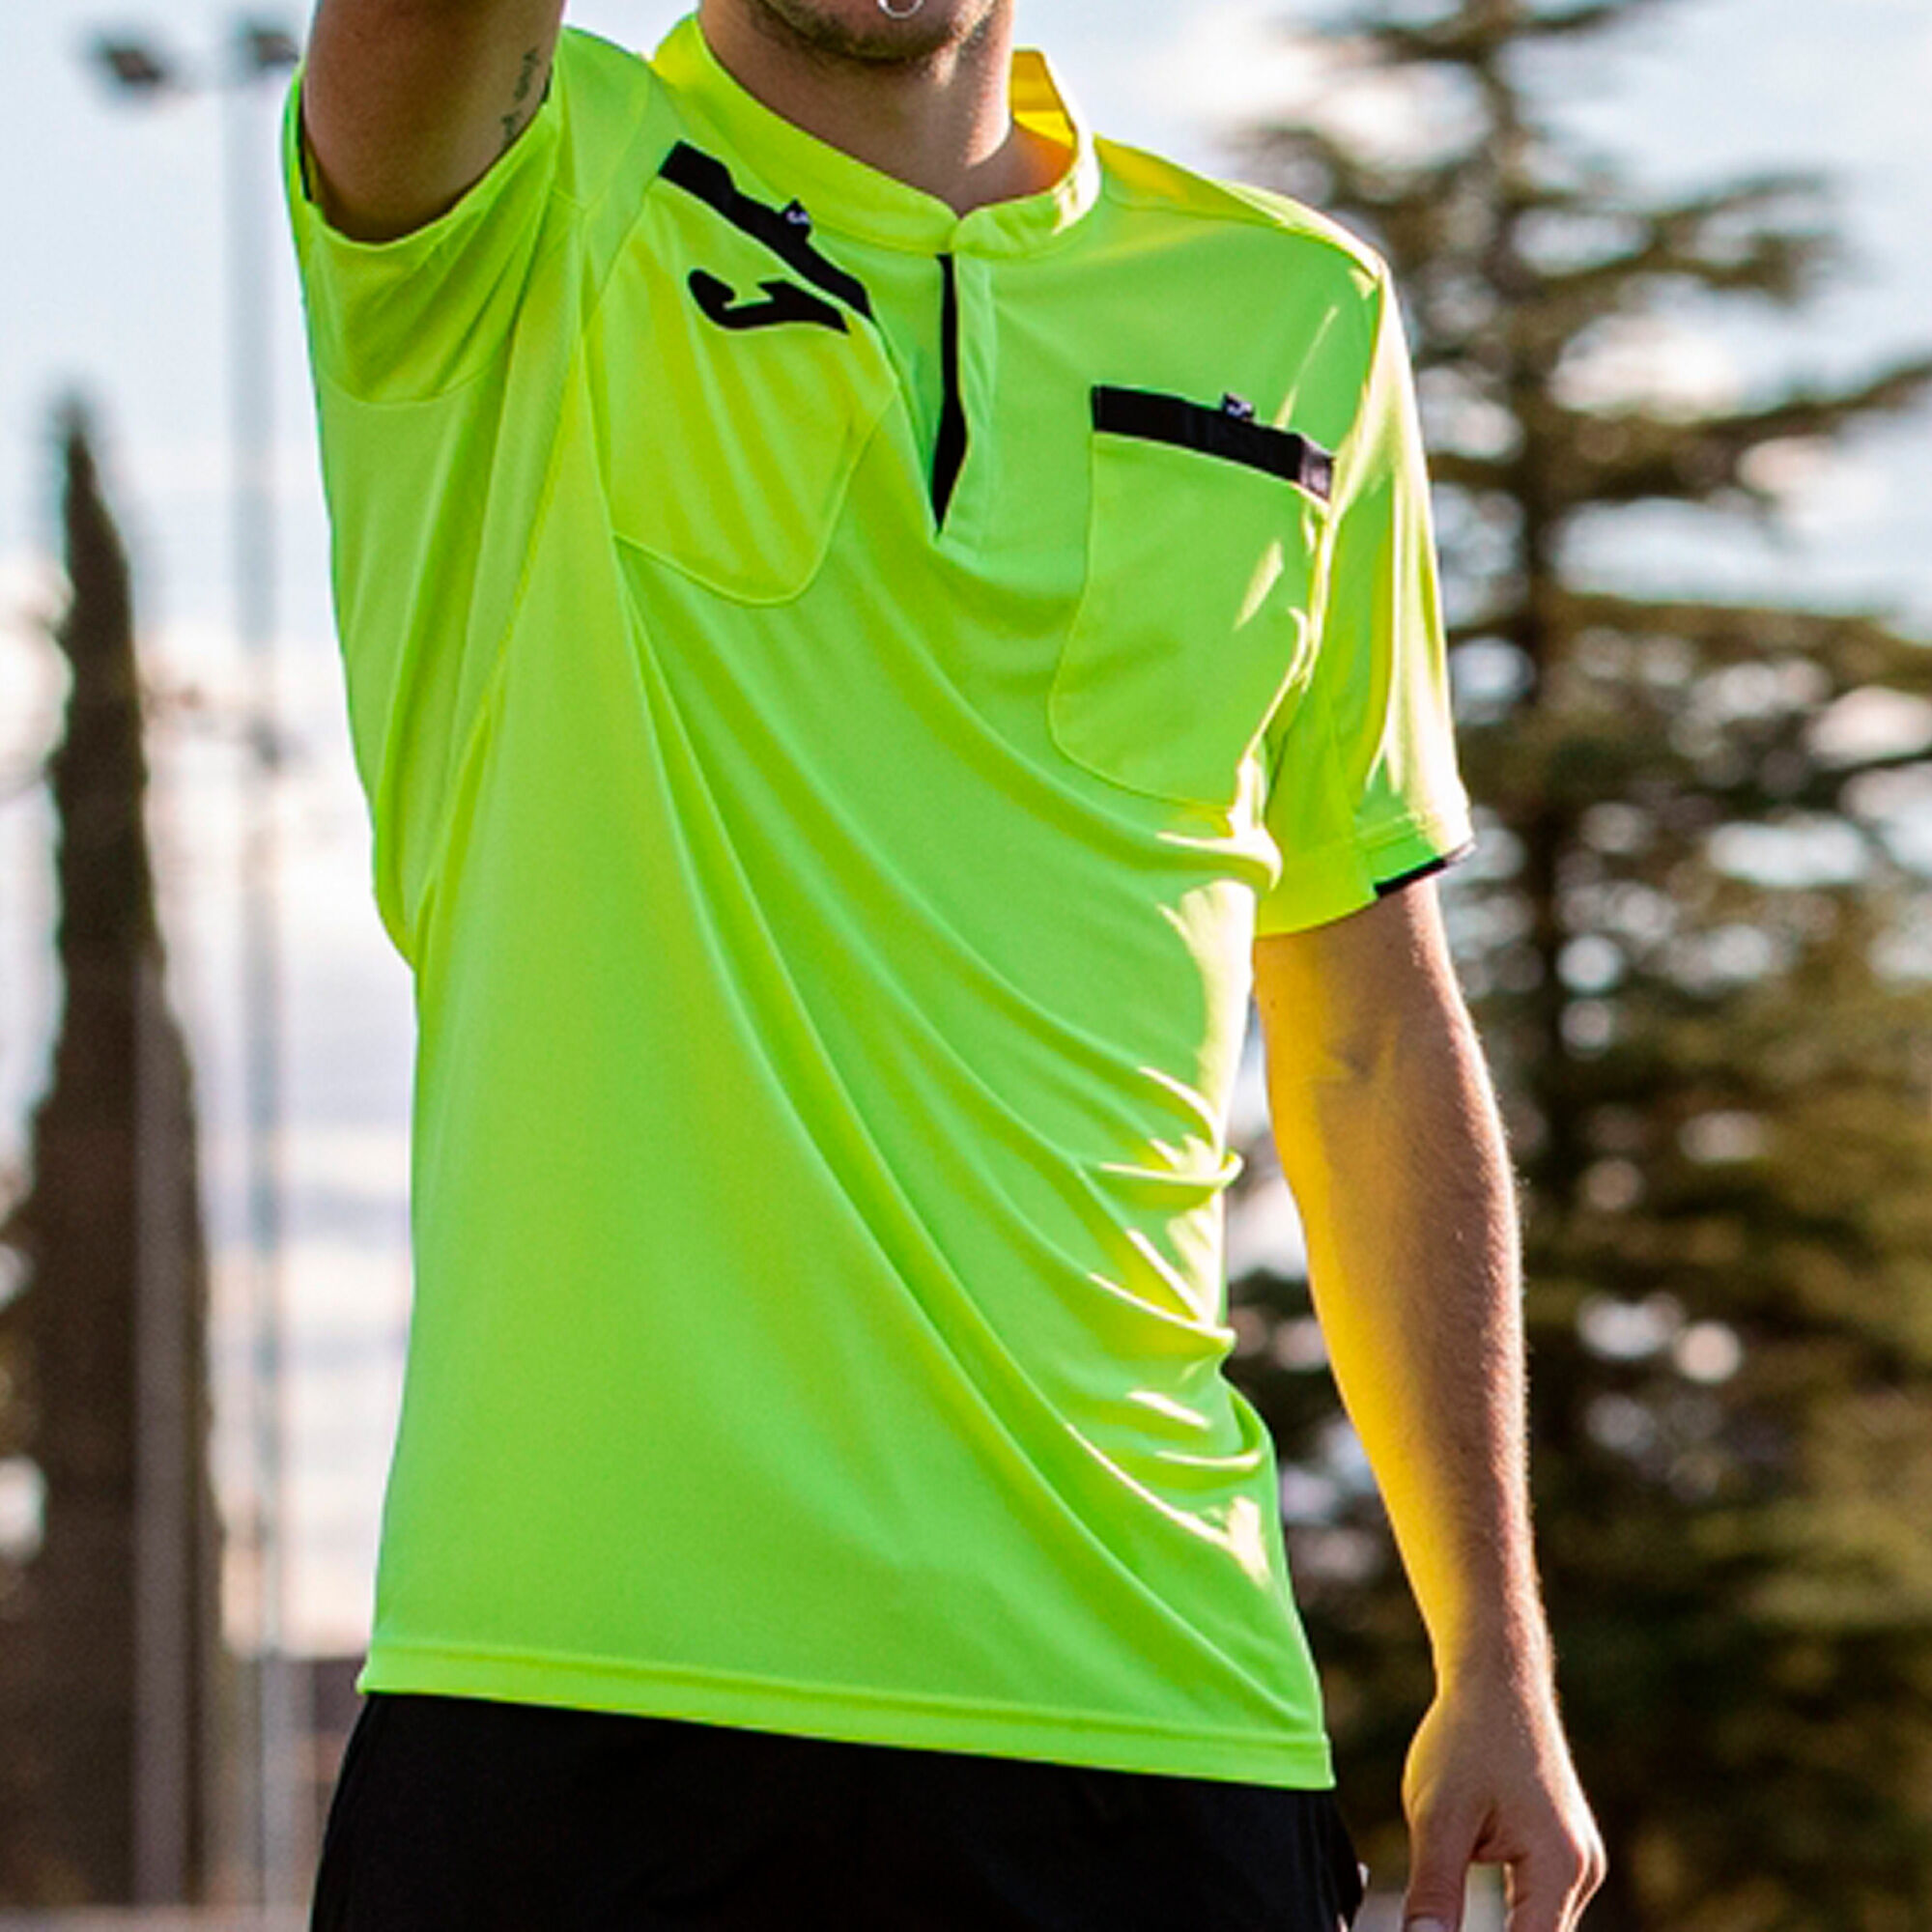 Maillot manches courtes homme Referee jaune fluo